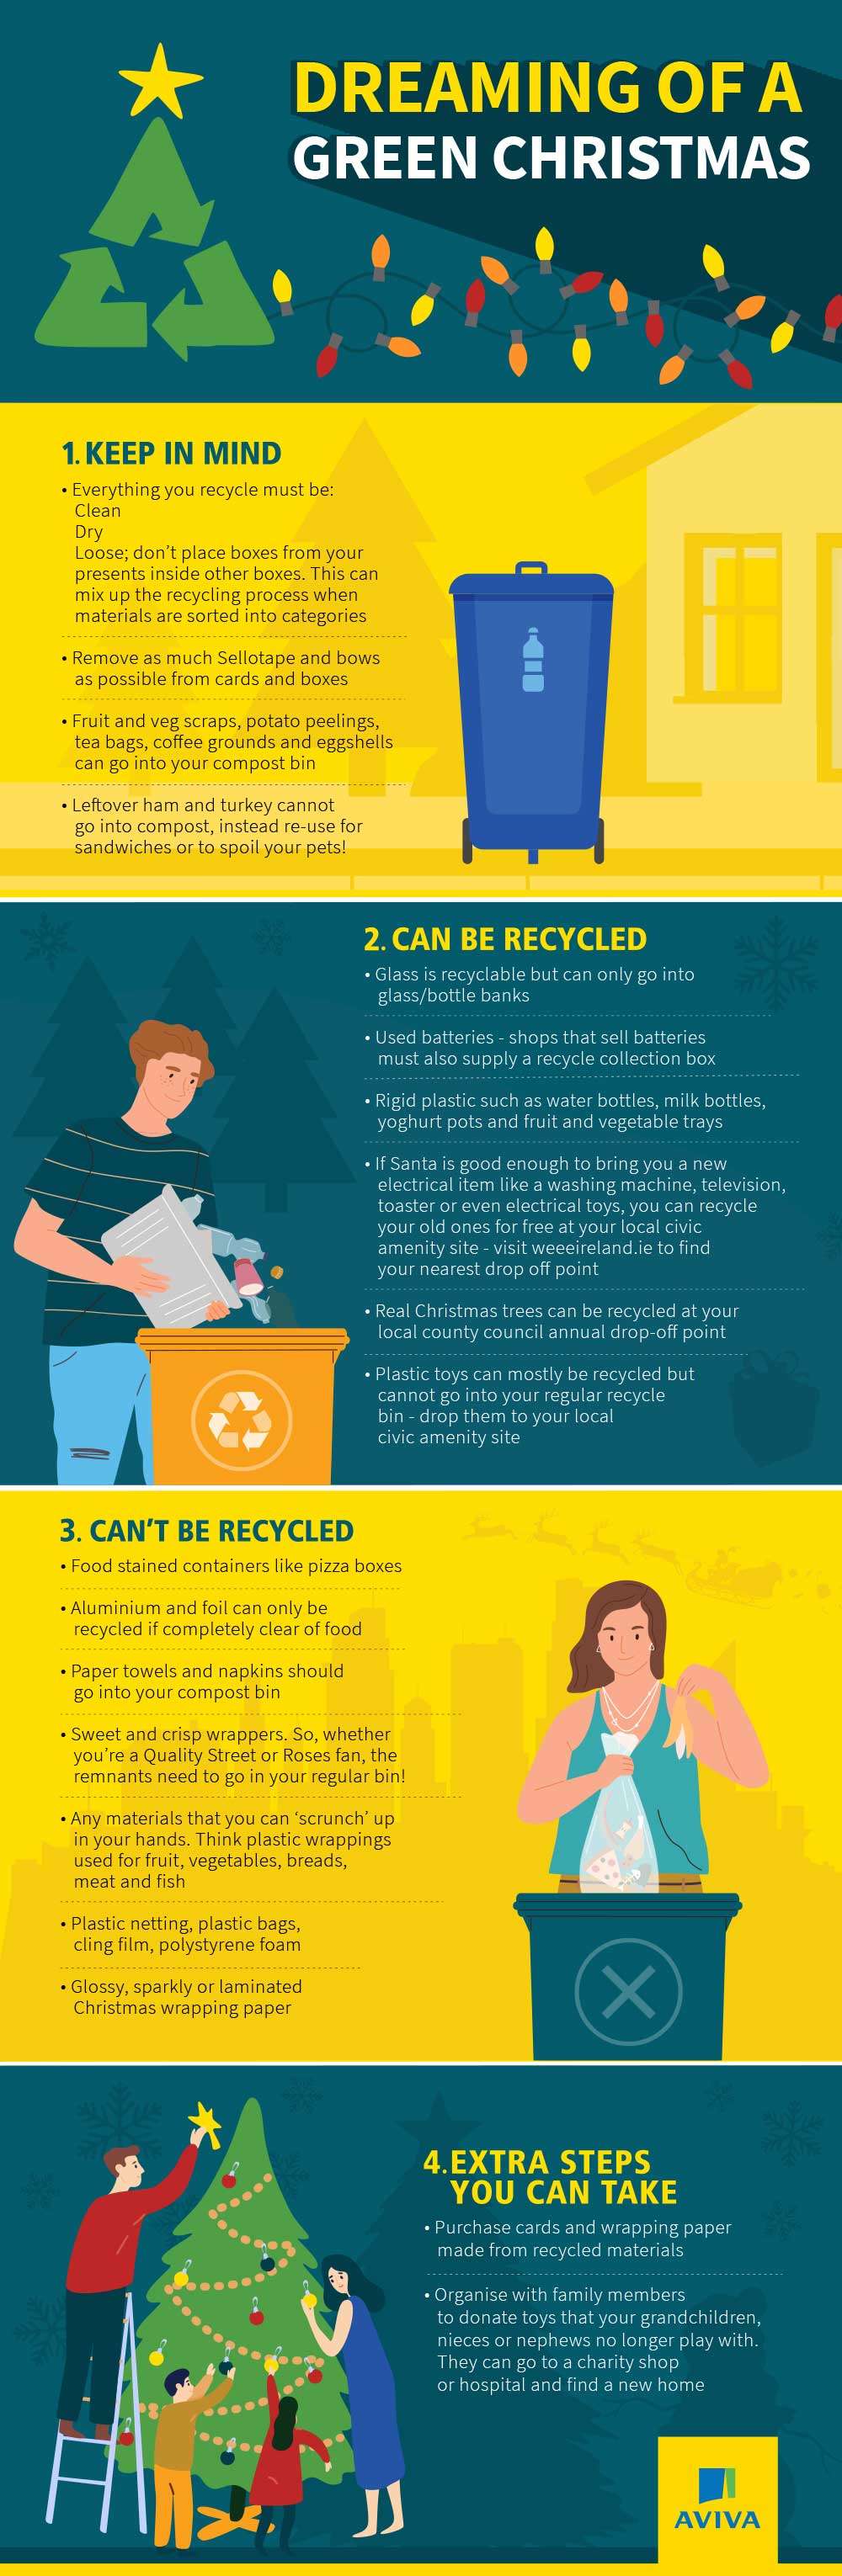 Reduce, reuse, recycle. Top tips for recycling this Christmas infographic